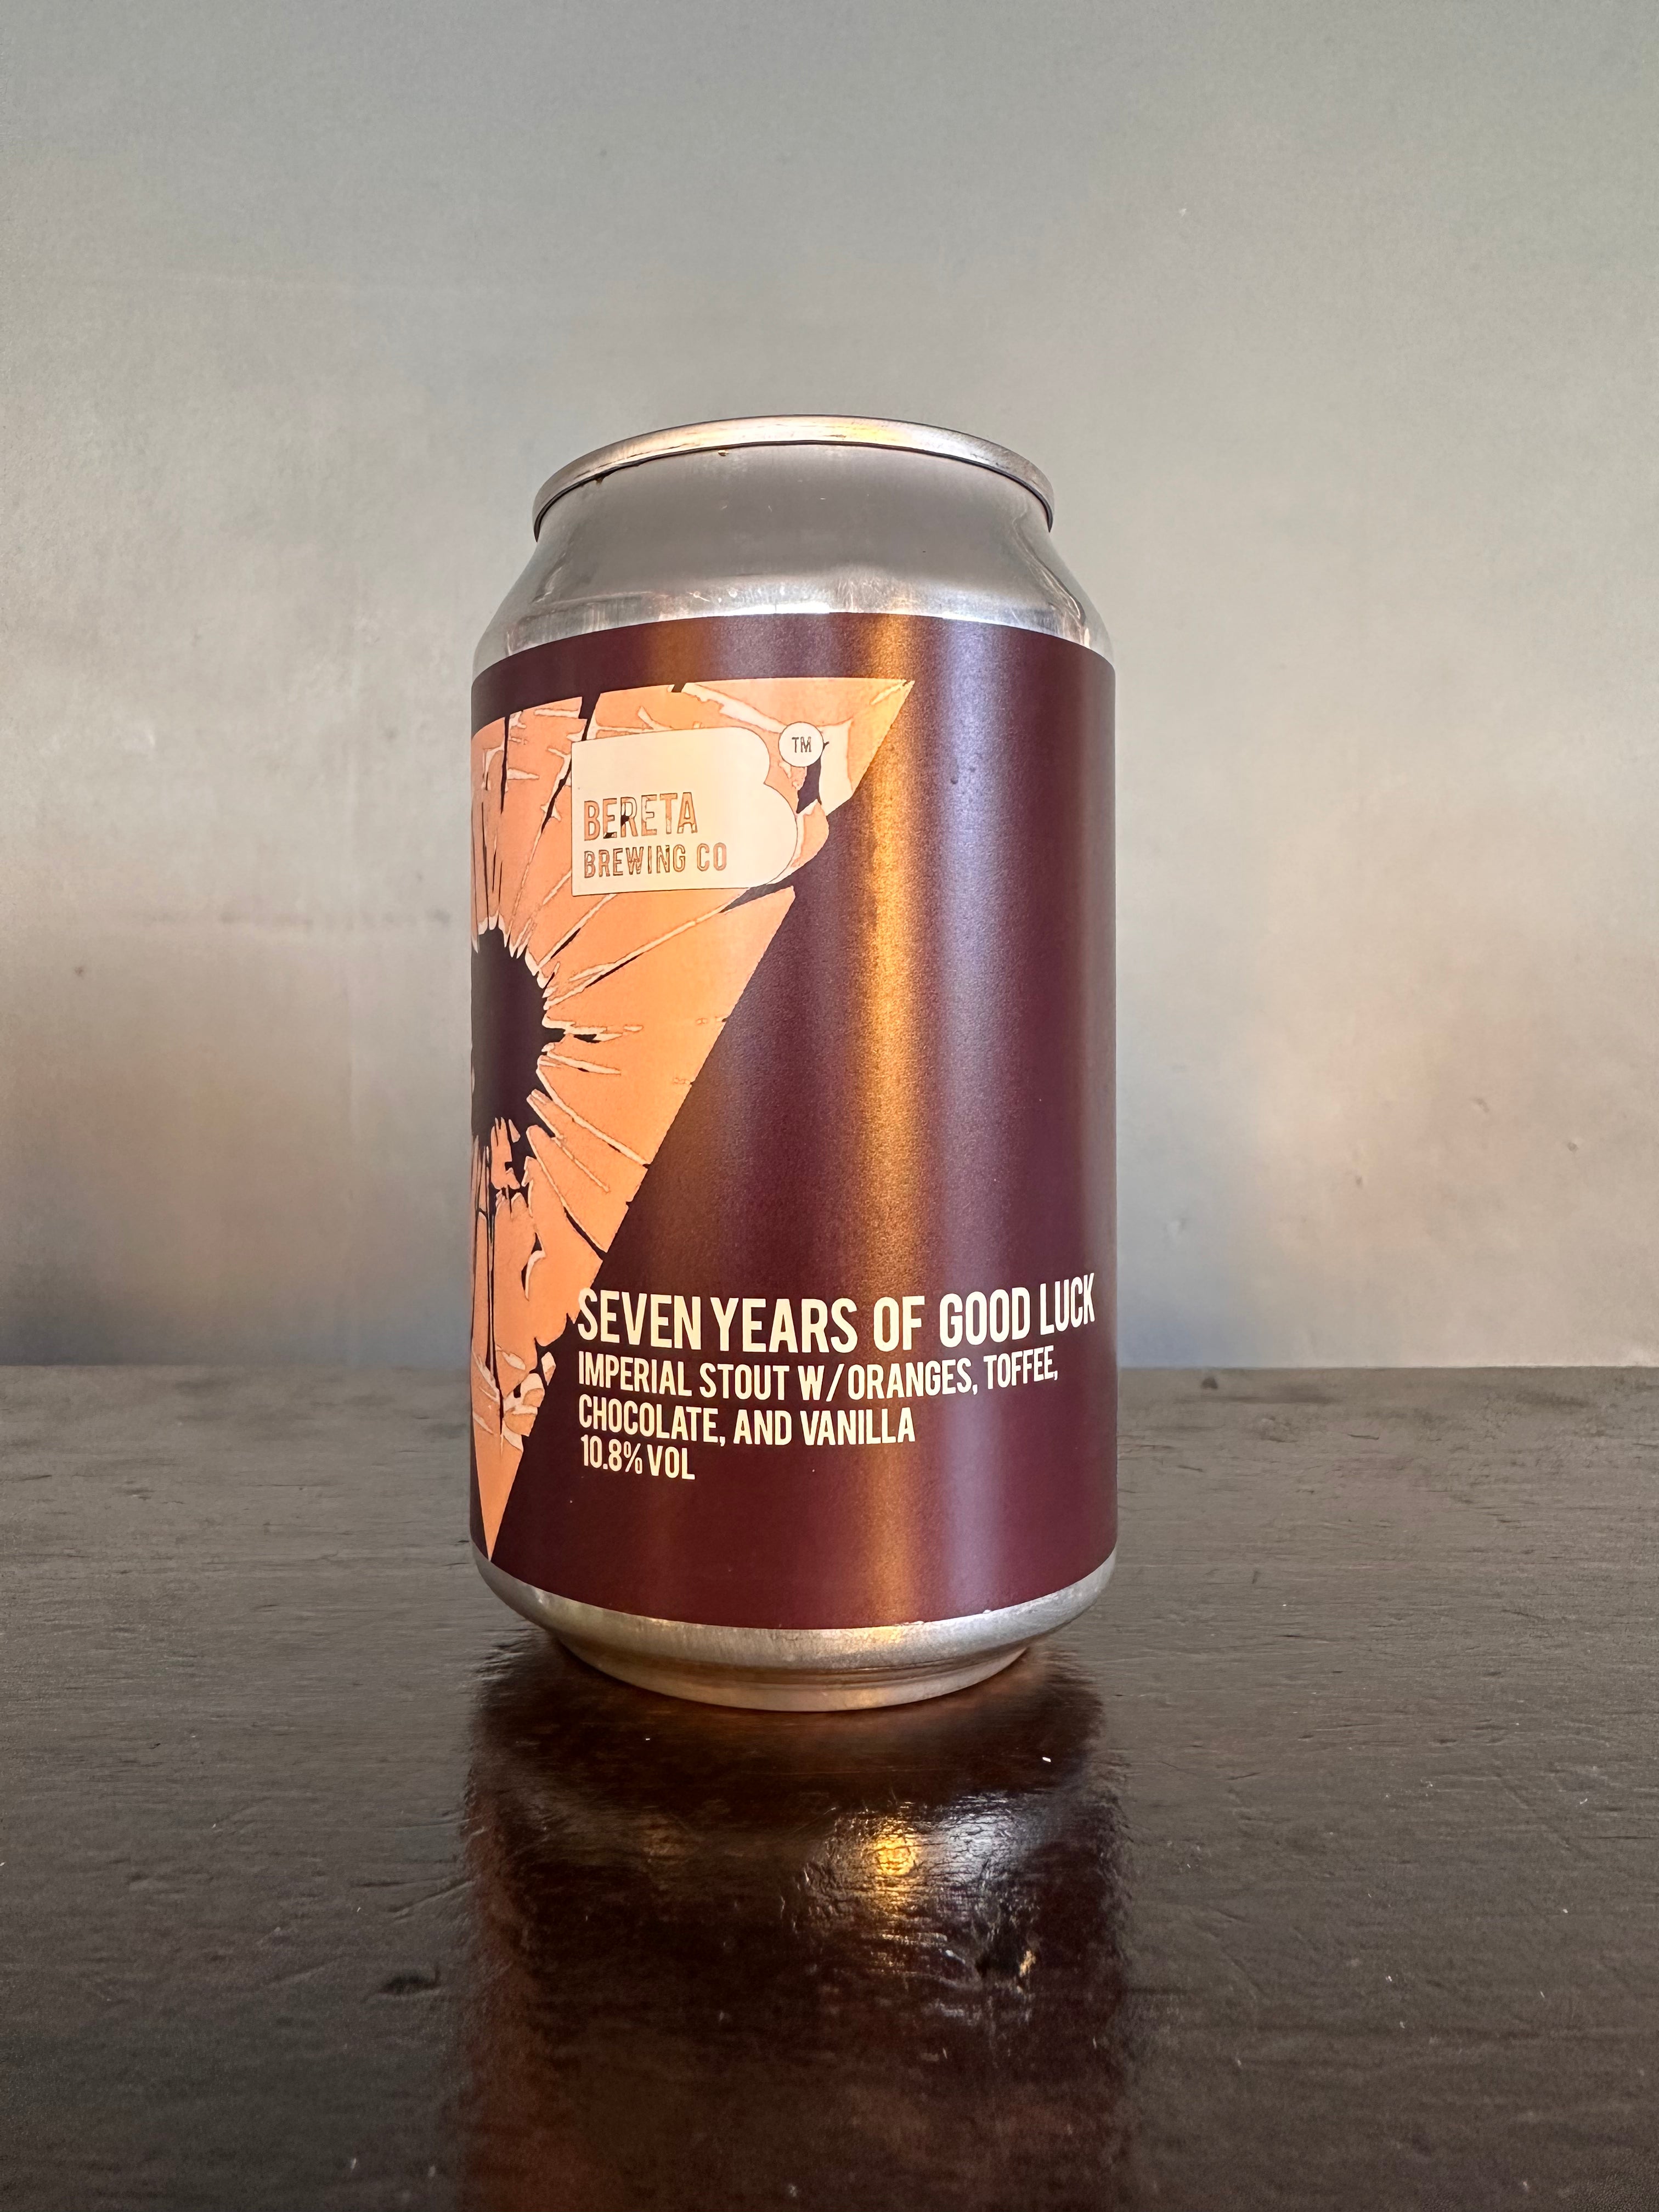 Bereta Seven Years of Good Luck Imperial Stout with Oranges, Toffee, Chocolate and Vanilla 10.8%